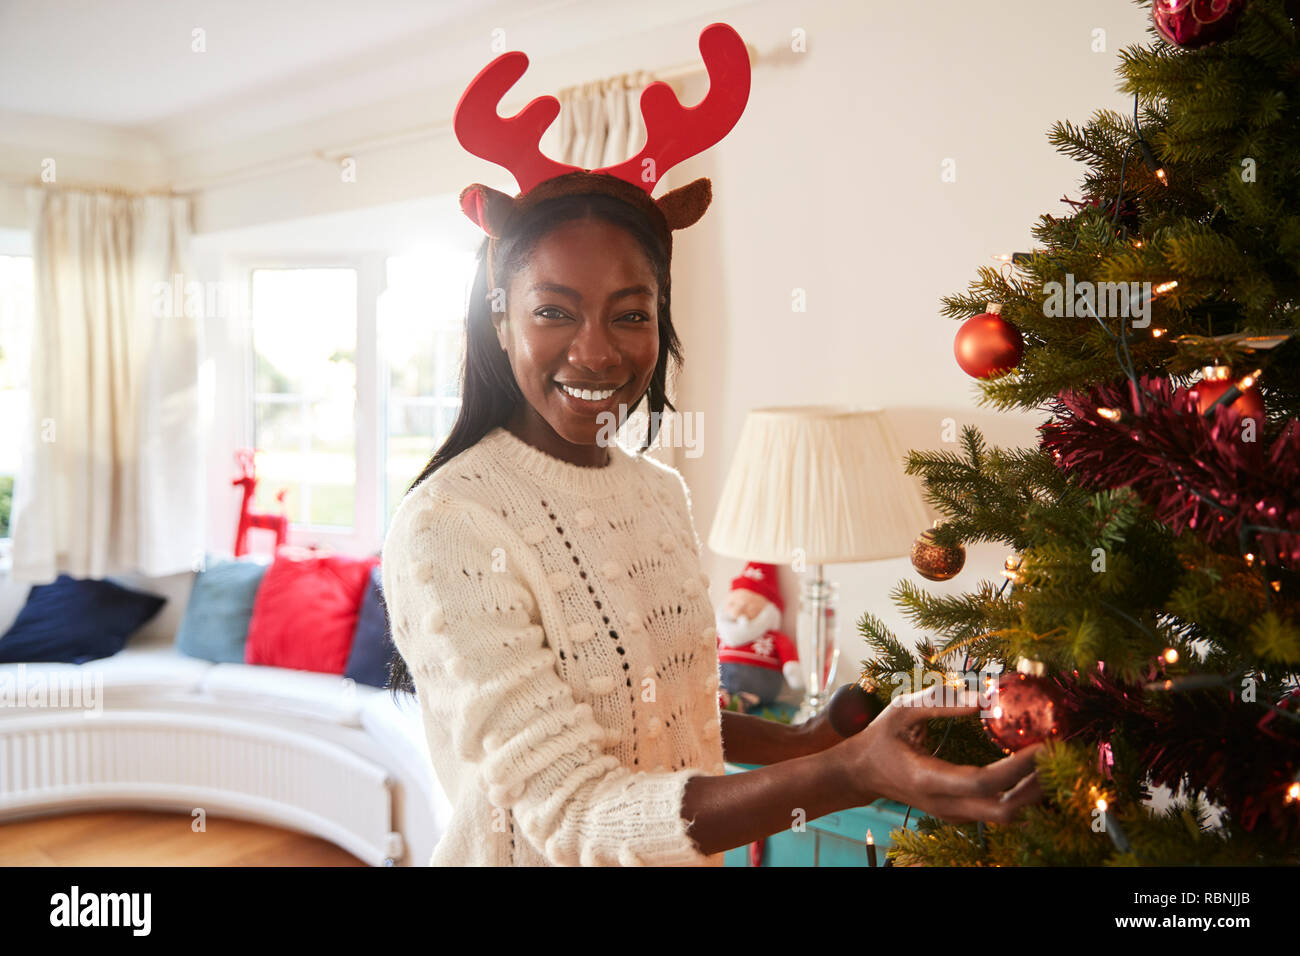 Portrait Of Woman Wearing Antlers Hanging Decorations On Christmas Tree At Home Stock Photo